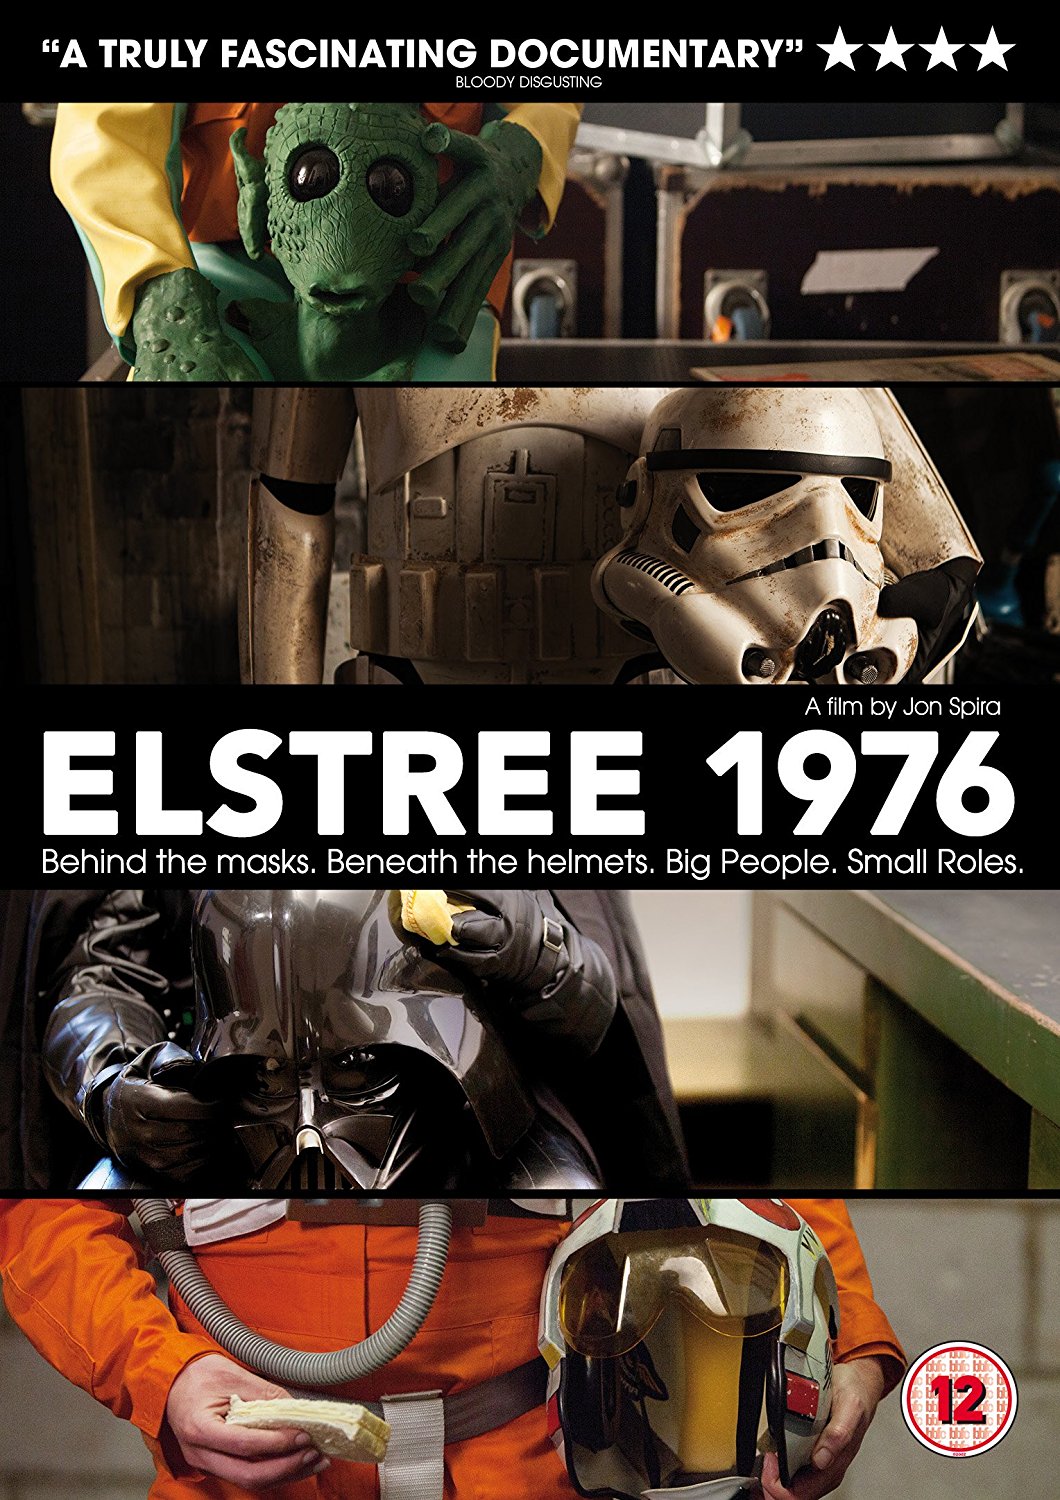 Elstree 1976 DVD review: the extras strike back